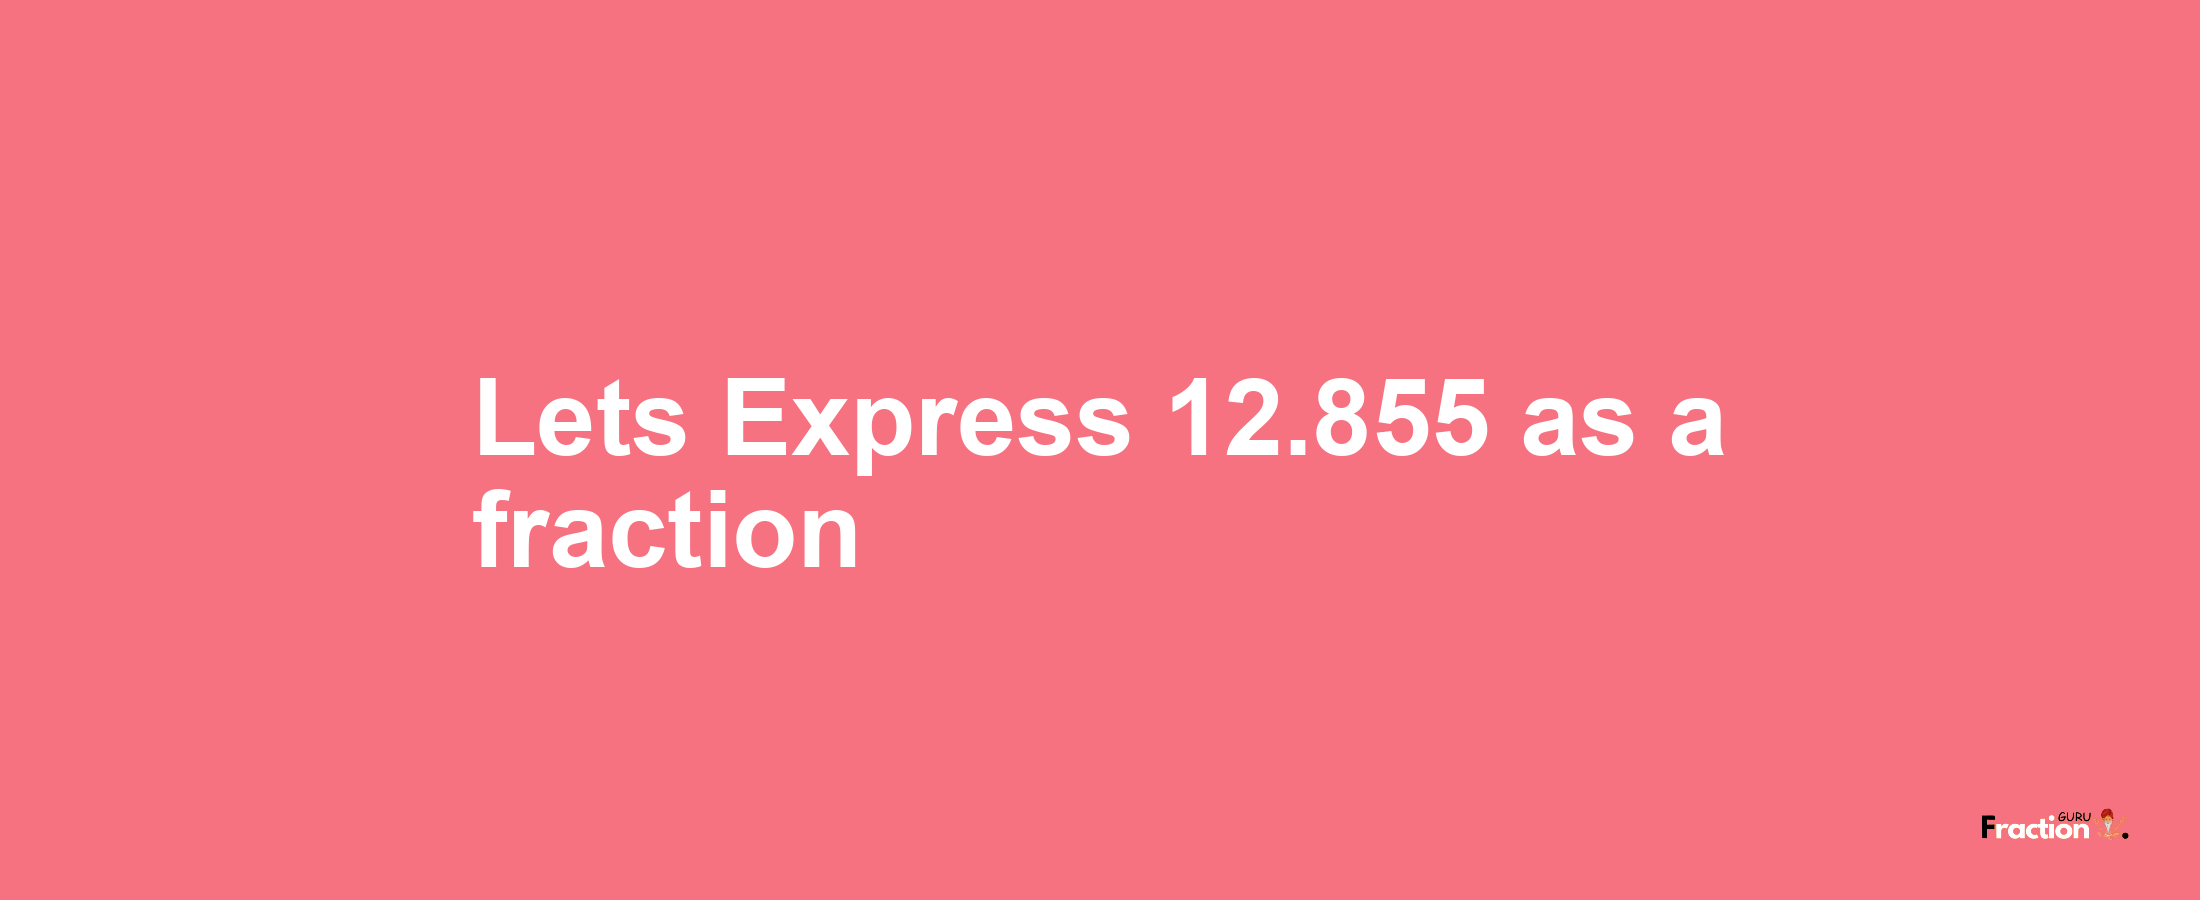 Lets Express 12.855 as afraction